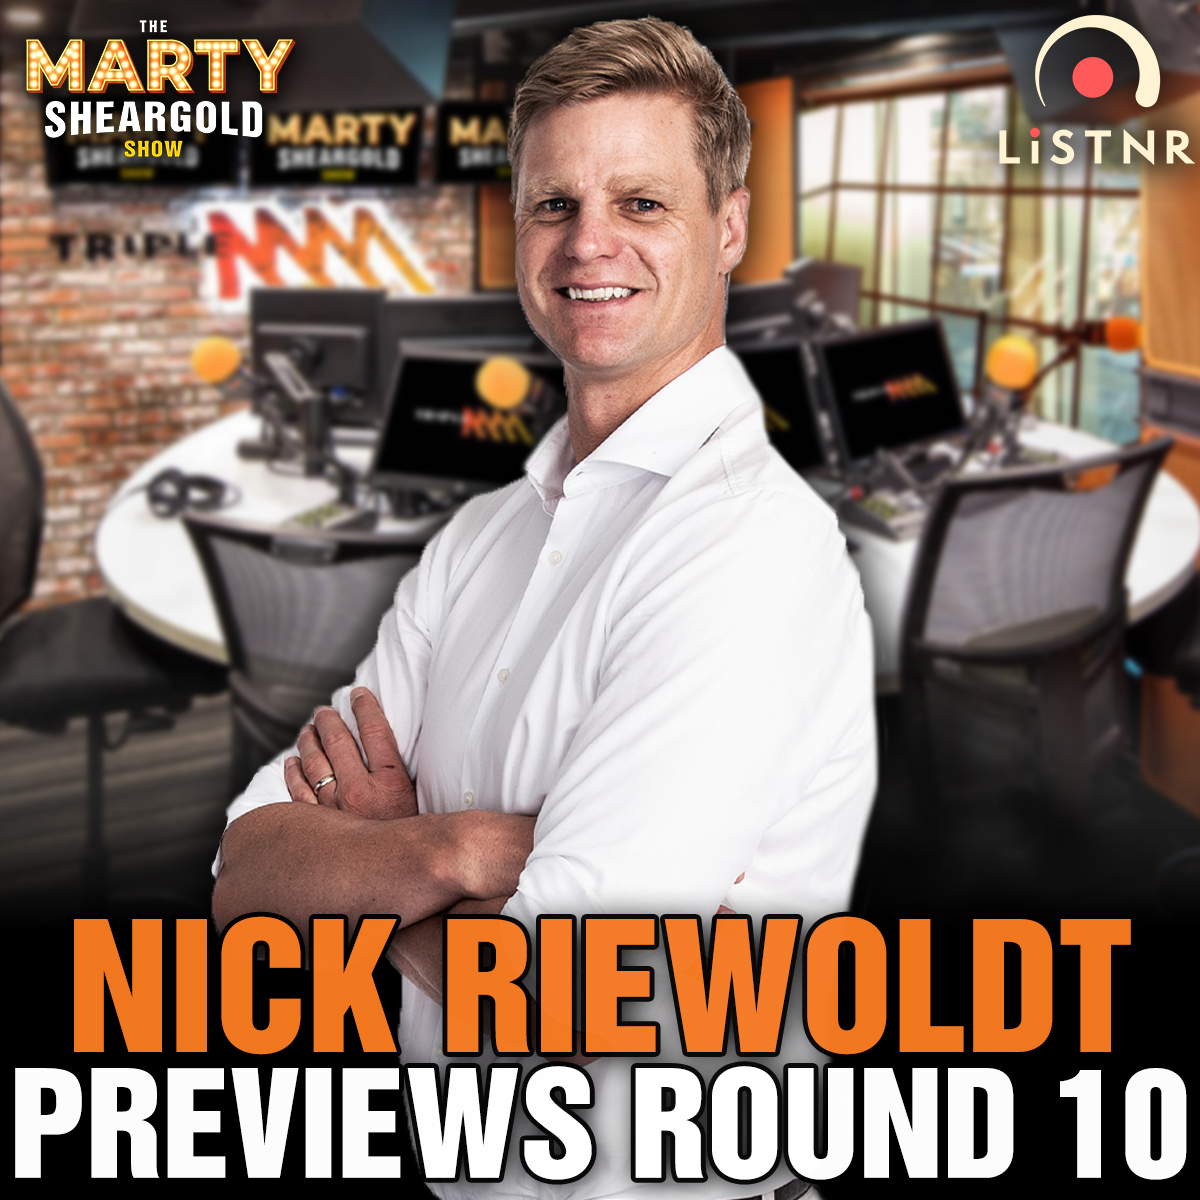 Nick Riewoldt tells us about the plan for an AFL team in Tasmania and previews round 10